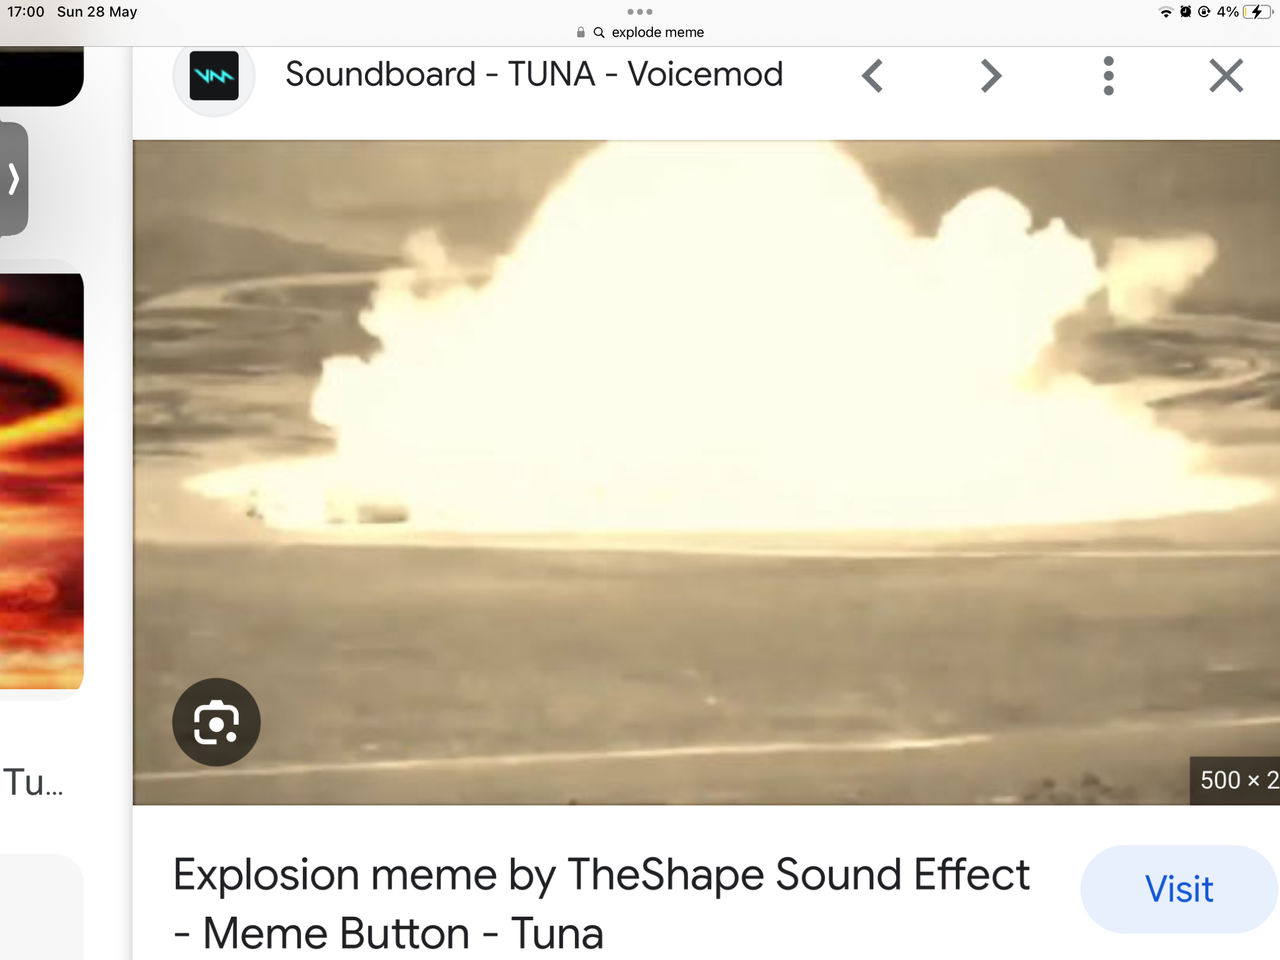 Game Over by Booming Sound Effect - Meme Button for Soundboard - Tuna